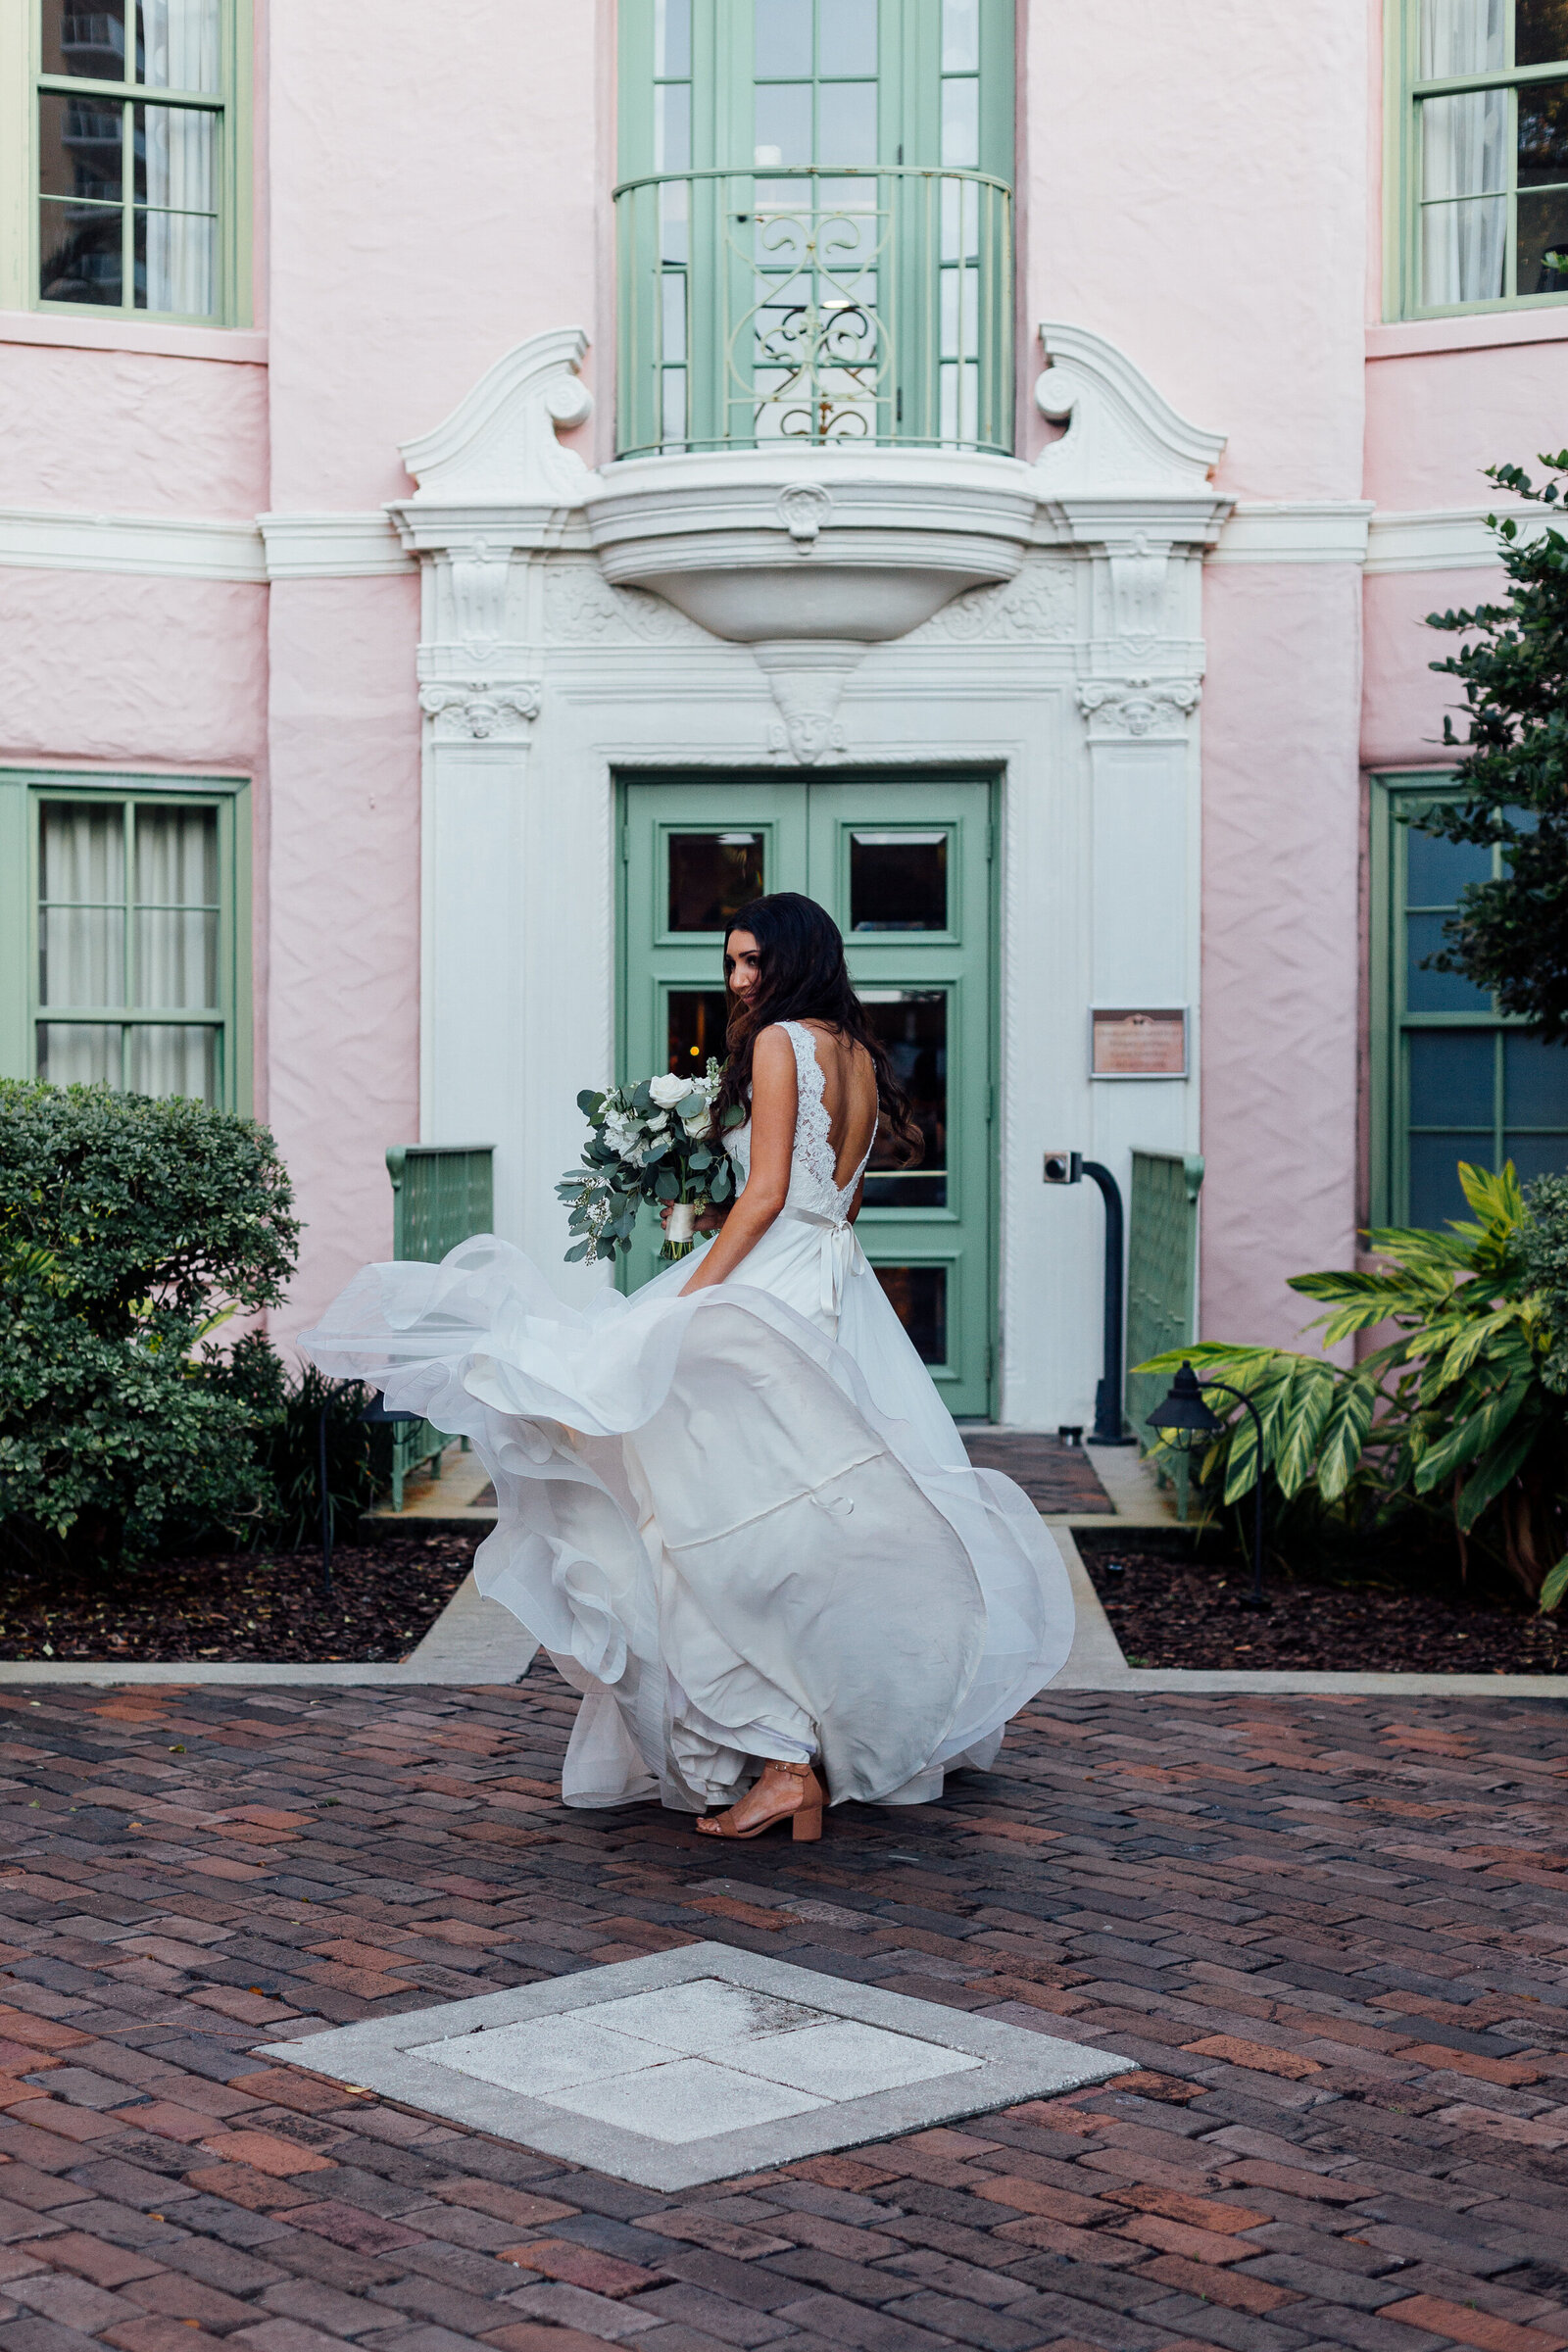 bride-walking-with-flowing-dress-into-pink-house-in-florida-photo-iris-and-urchin-ryley